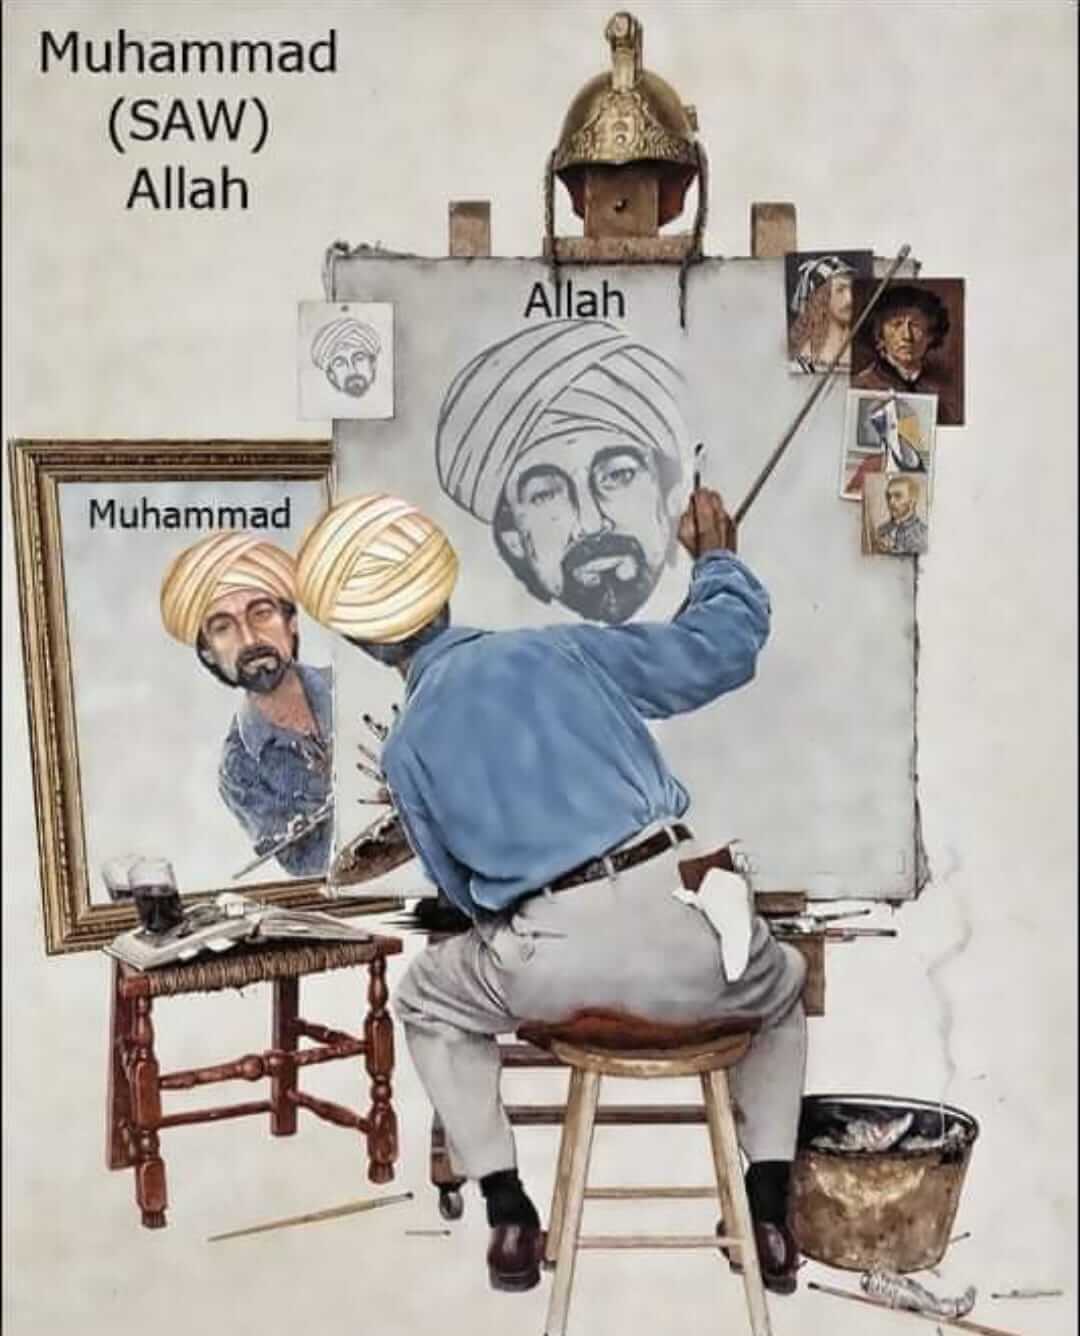 Author of the Quran